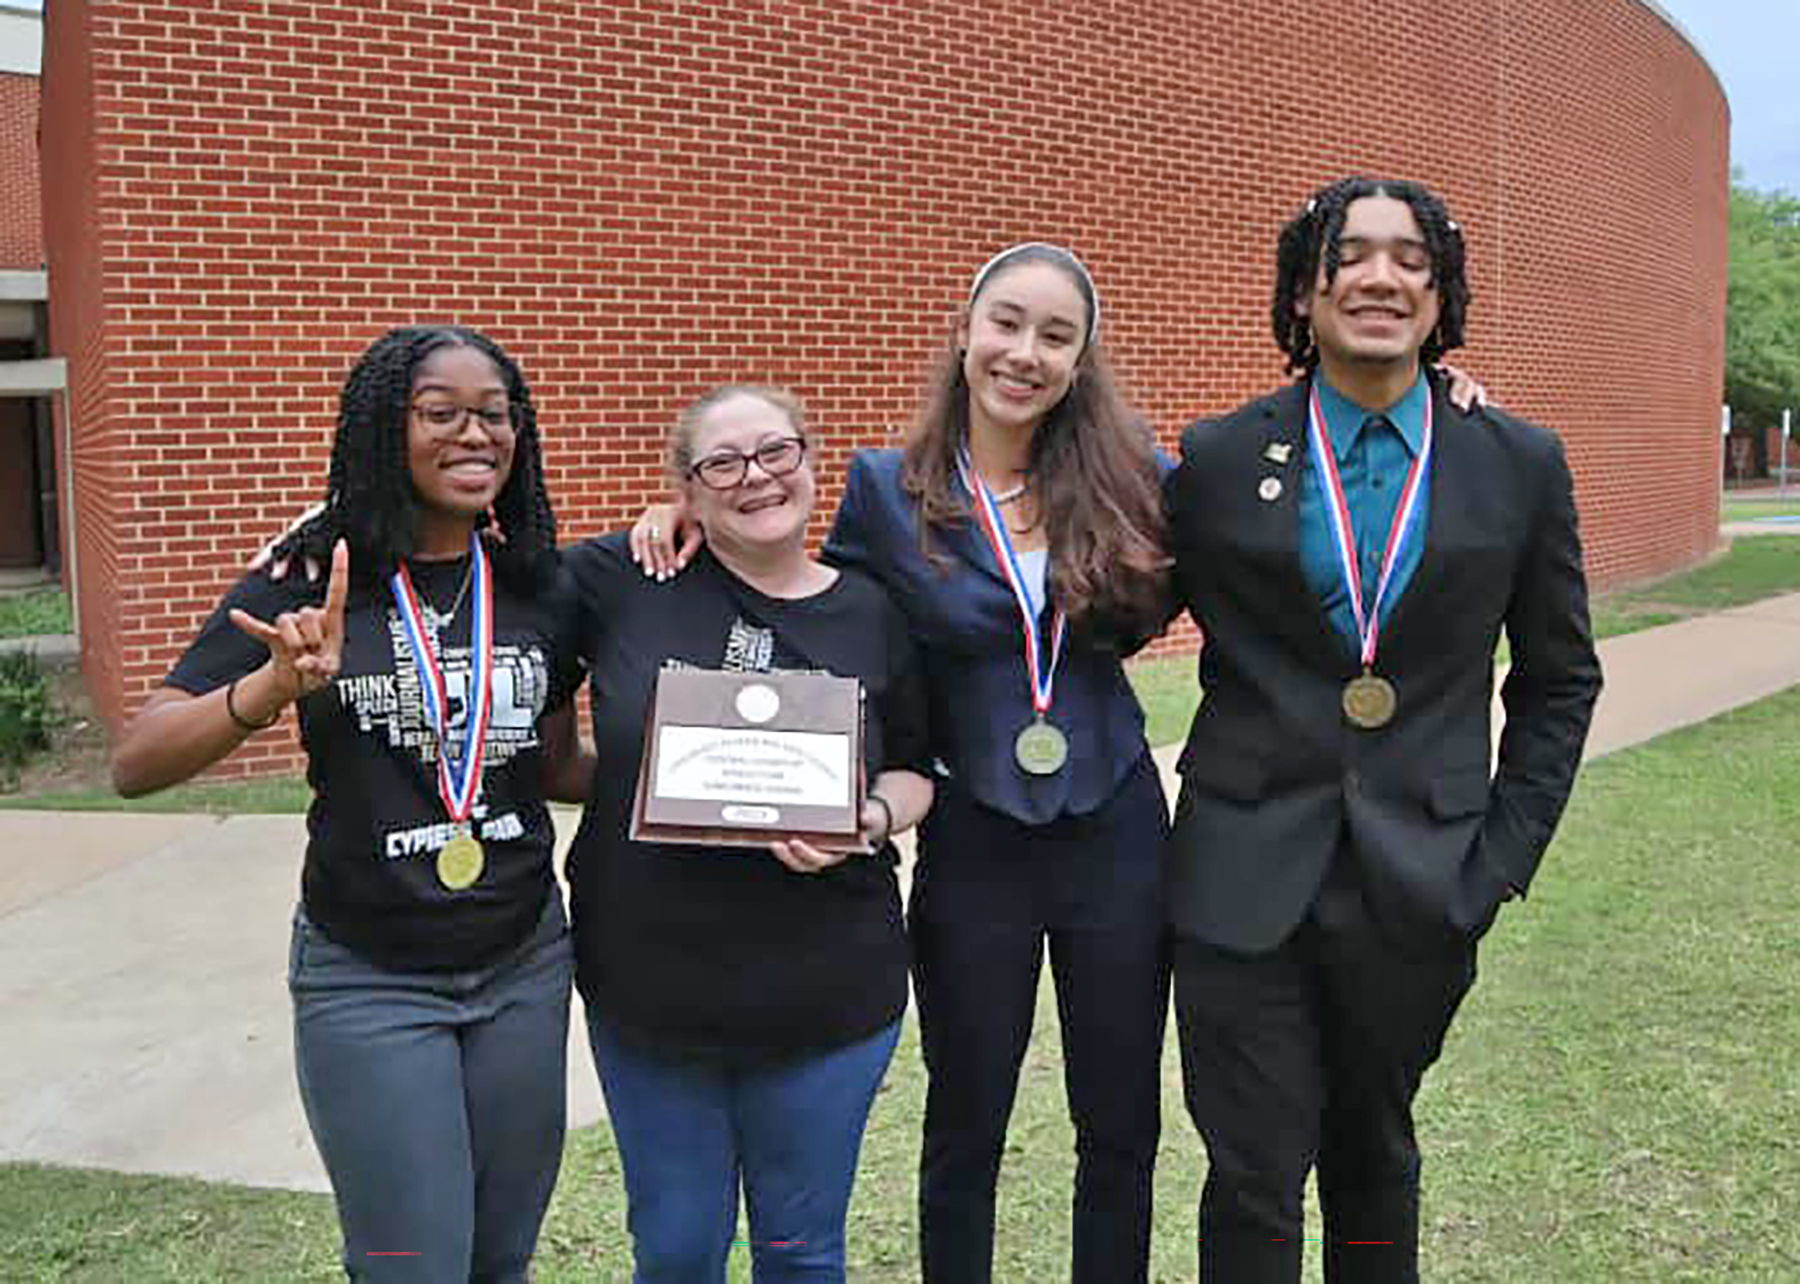 Students Excel at Regional Academic Meets to Qualify for State